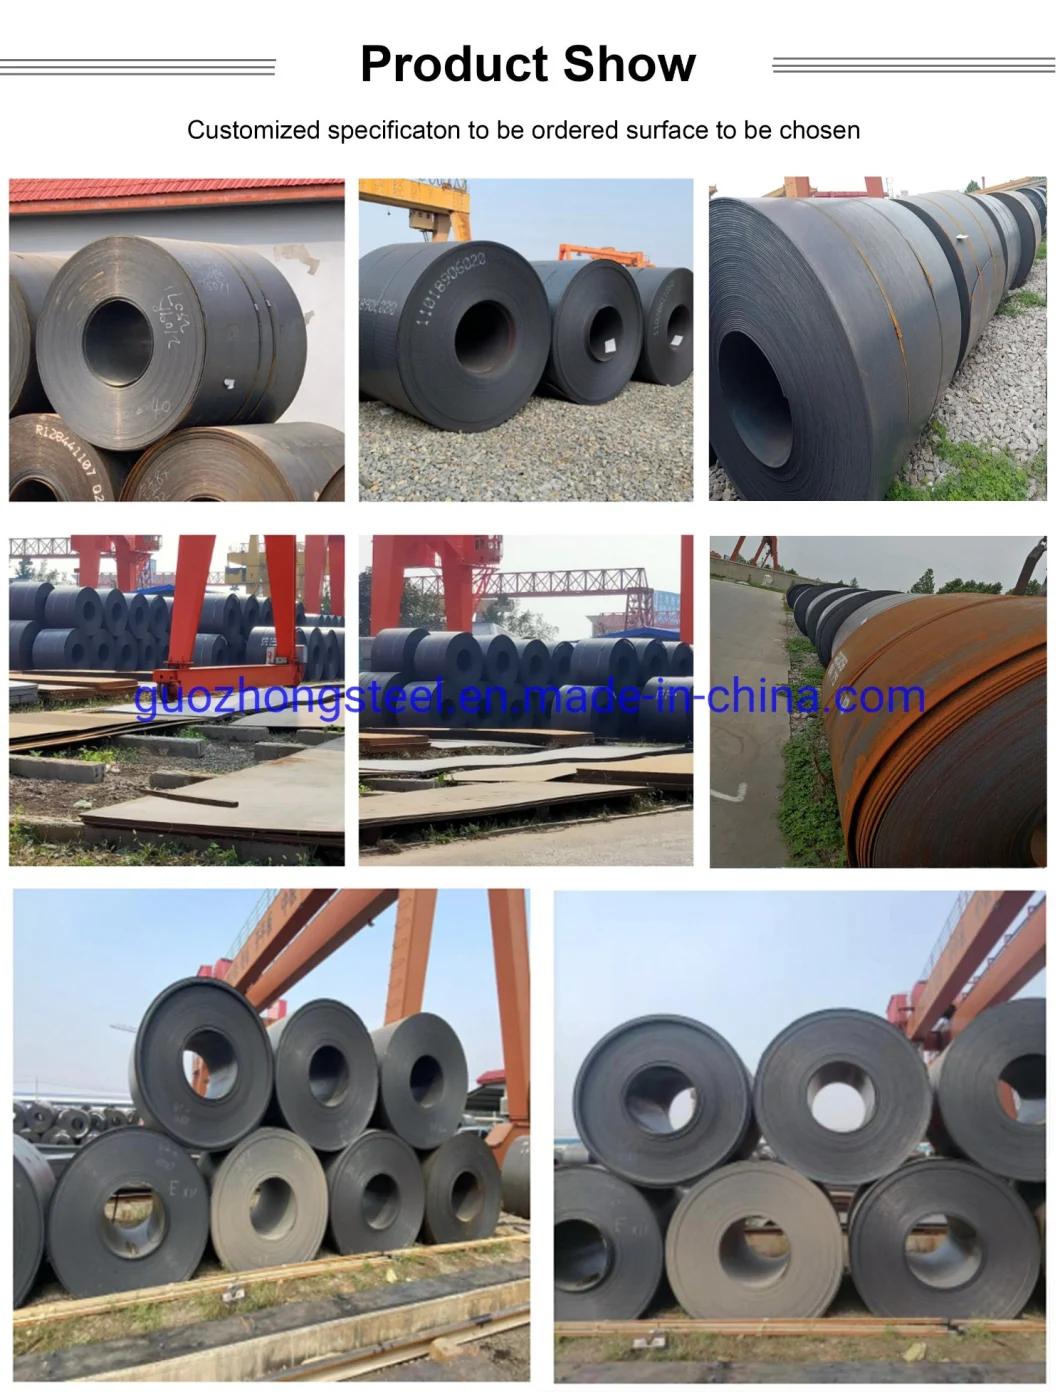 Good Choice Steel Coil Guozhong Cold Rolled Carbon Alloy Steel Coil/Roll with Good Quantity